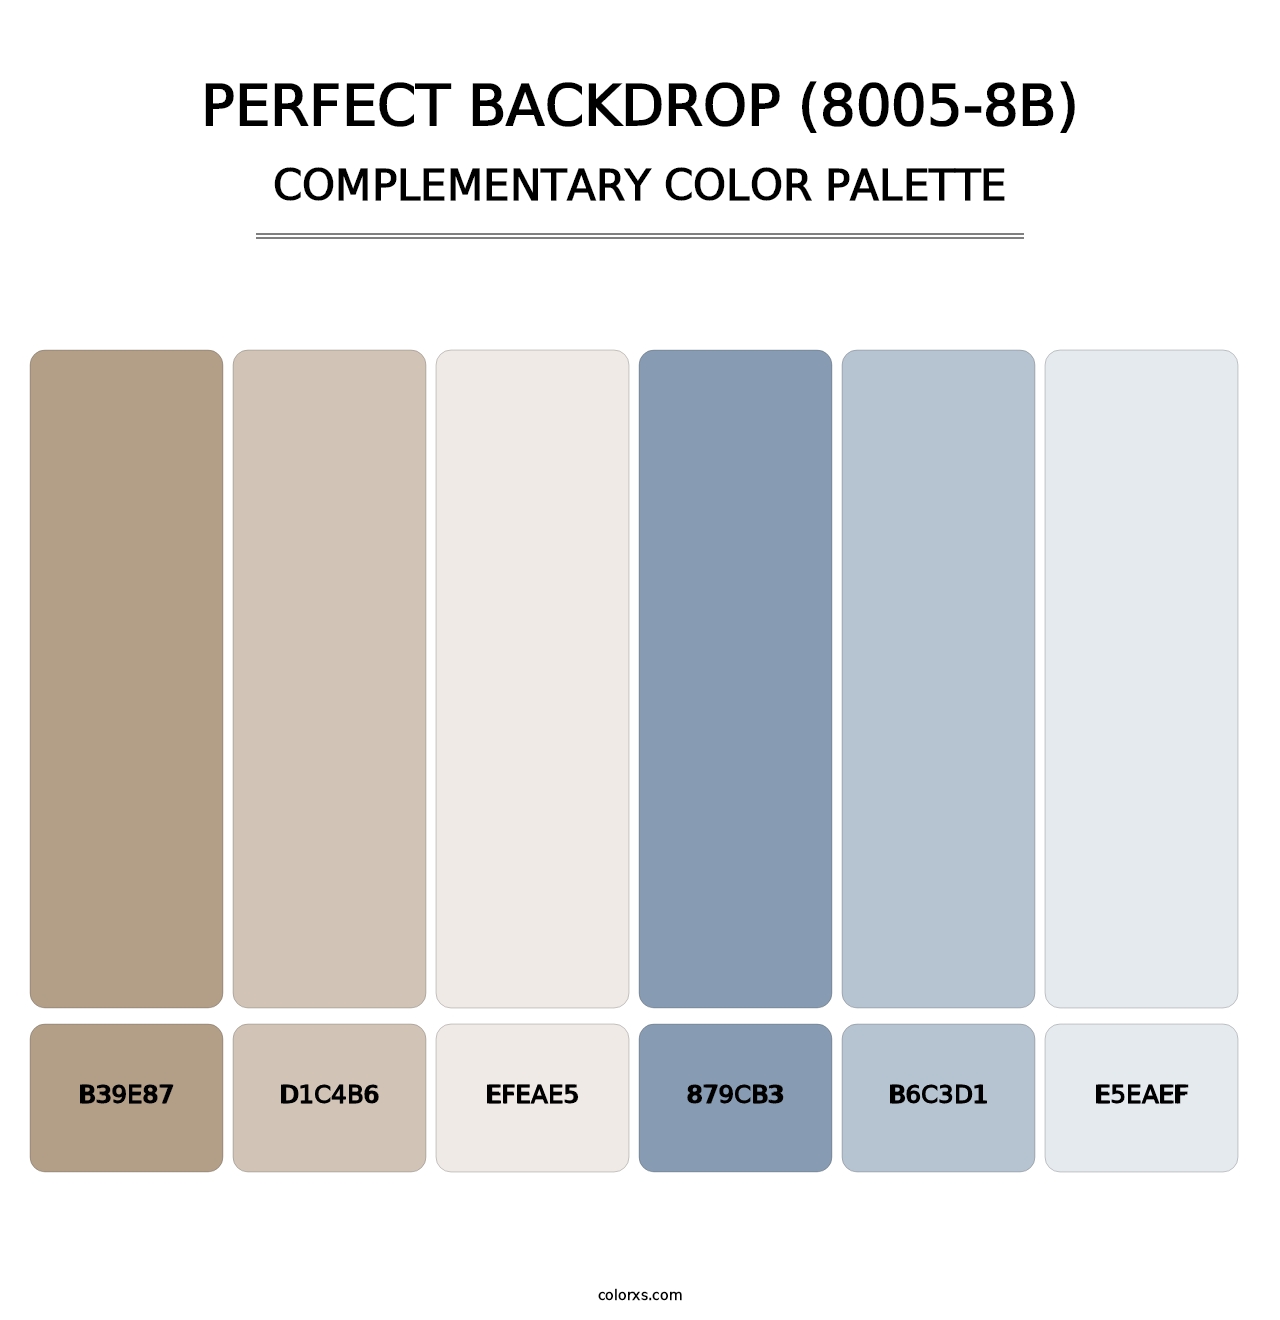 Perfect Backdrop (8005-8B) - Complementary Color Palette